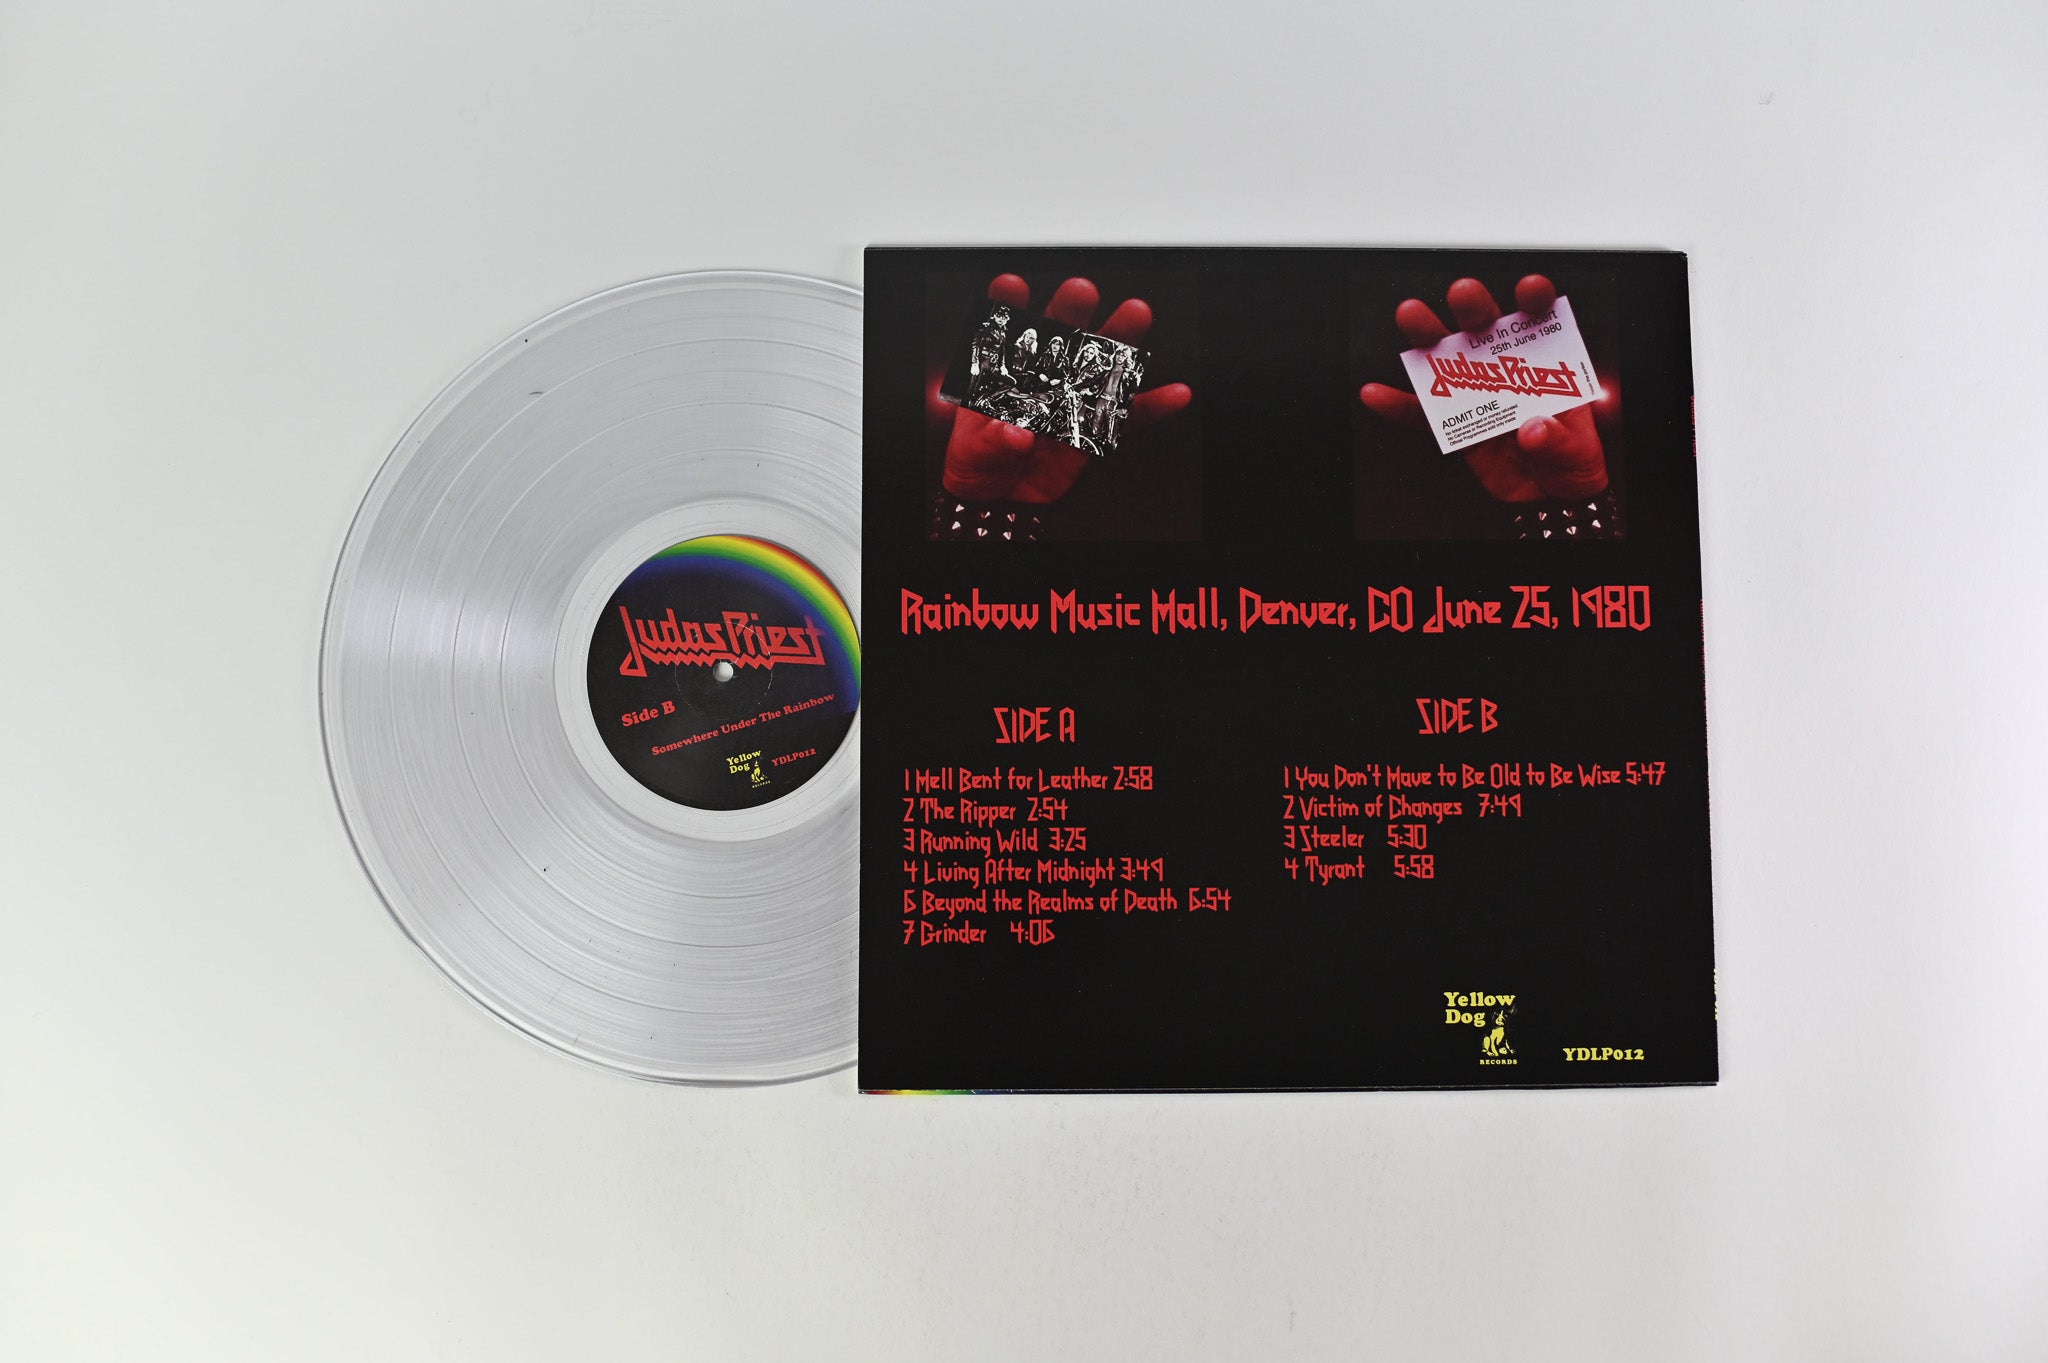 Judas Priest - Somewhere Under The Rainbow: Denver, CO June 25th 1980 Clear Unofficial Pressing